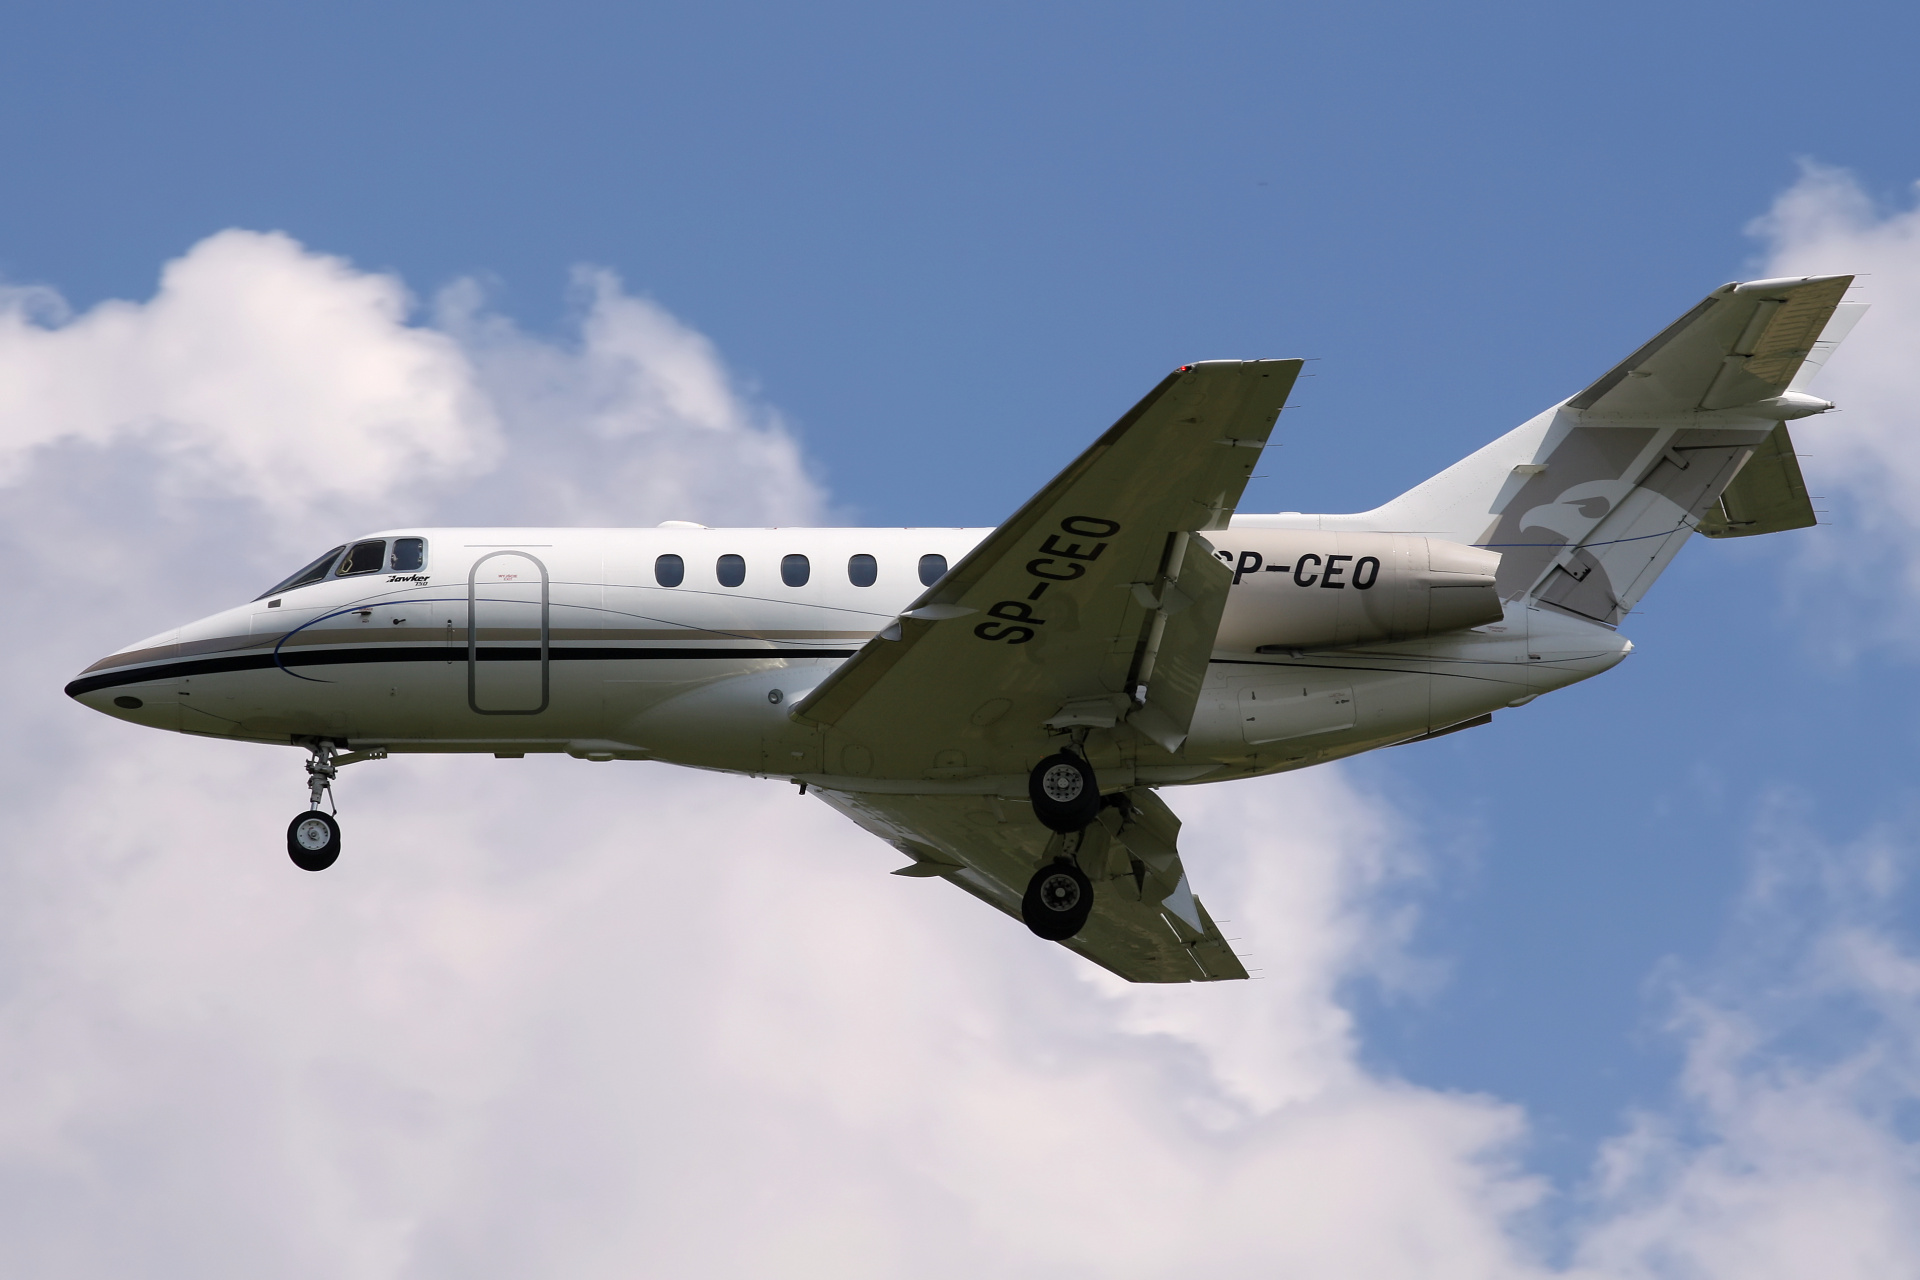 SP-CEO, Jet Story (Aircraft » EPWA Spotting » BAe 125 and revisions » Raytheon Hawker 750)